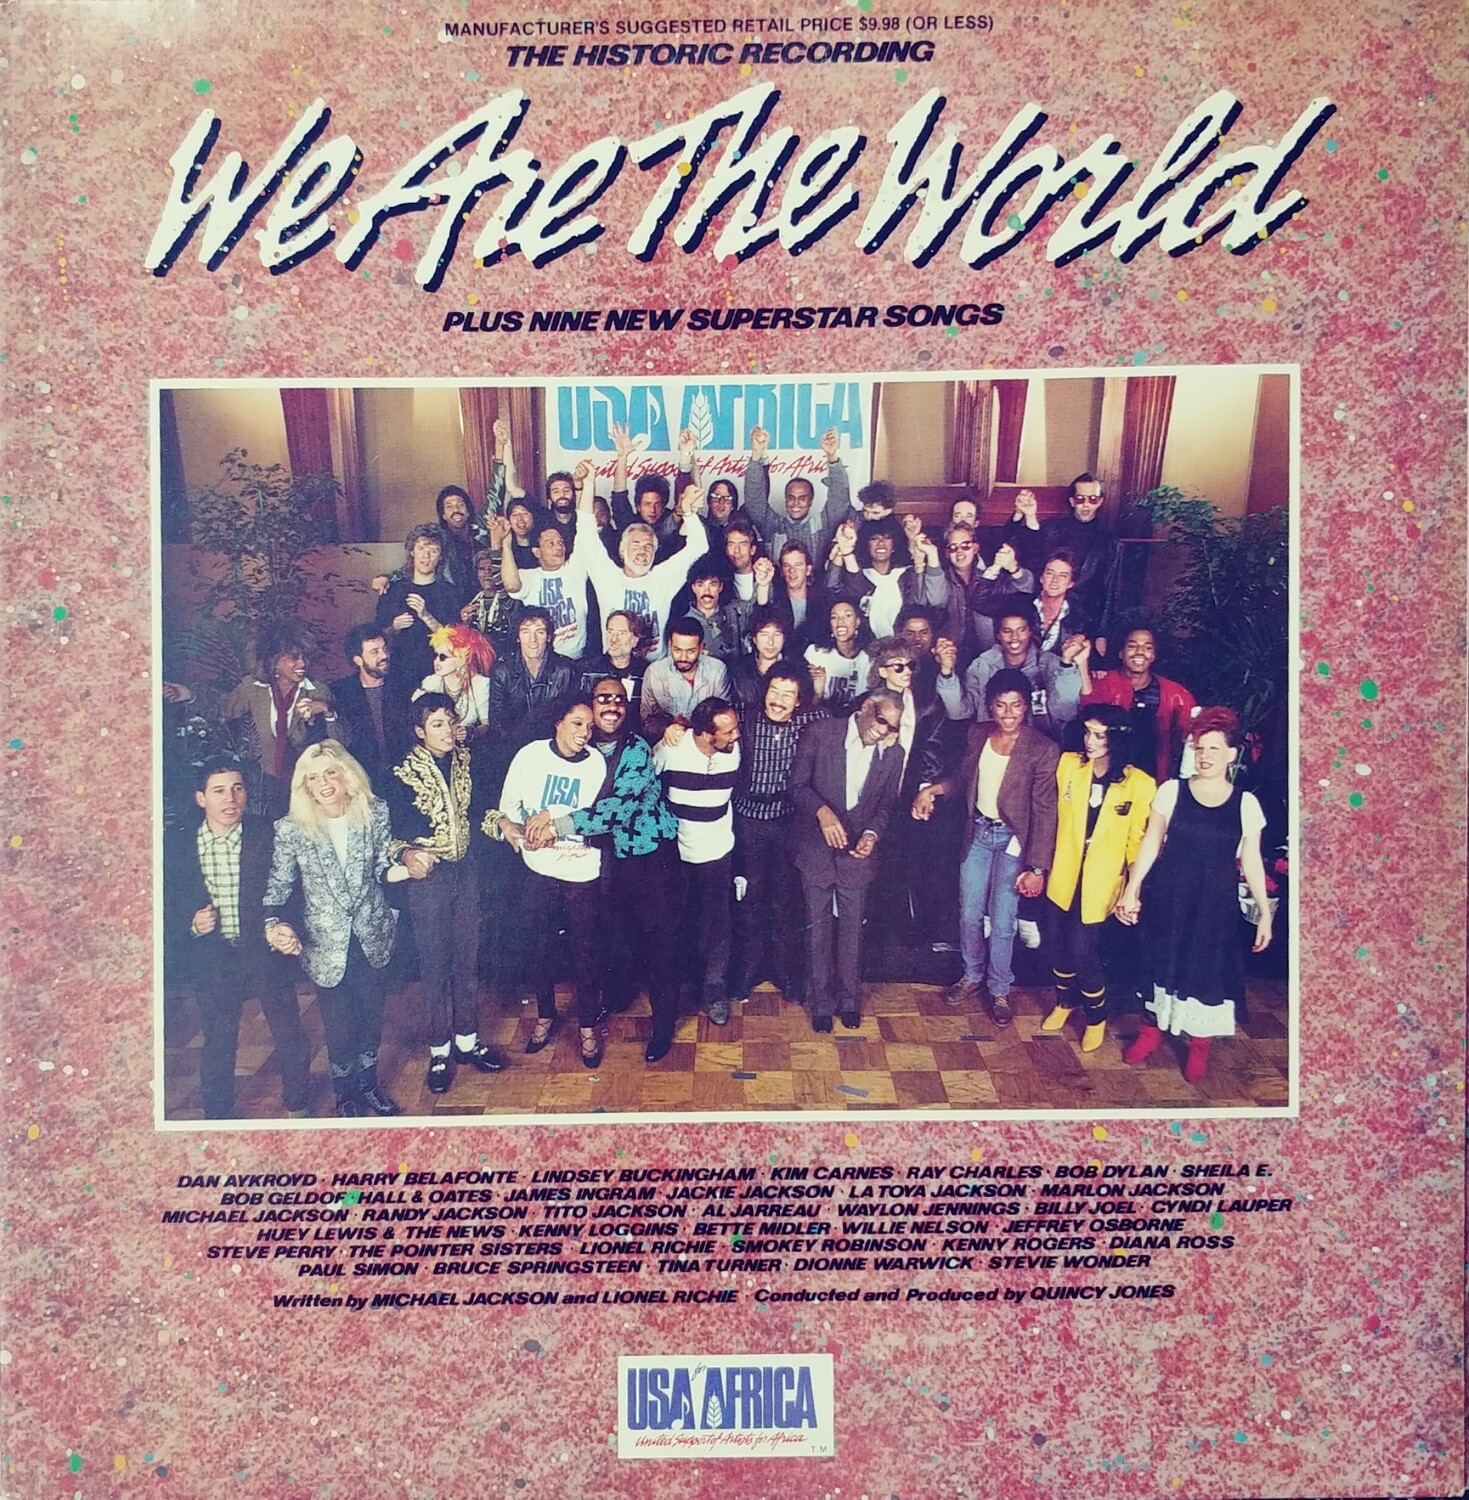 USA for Africa - We are the world